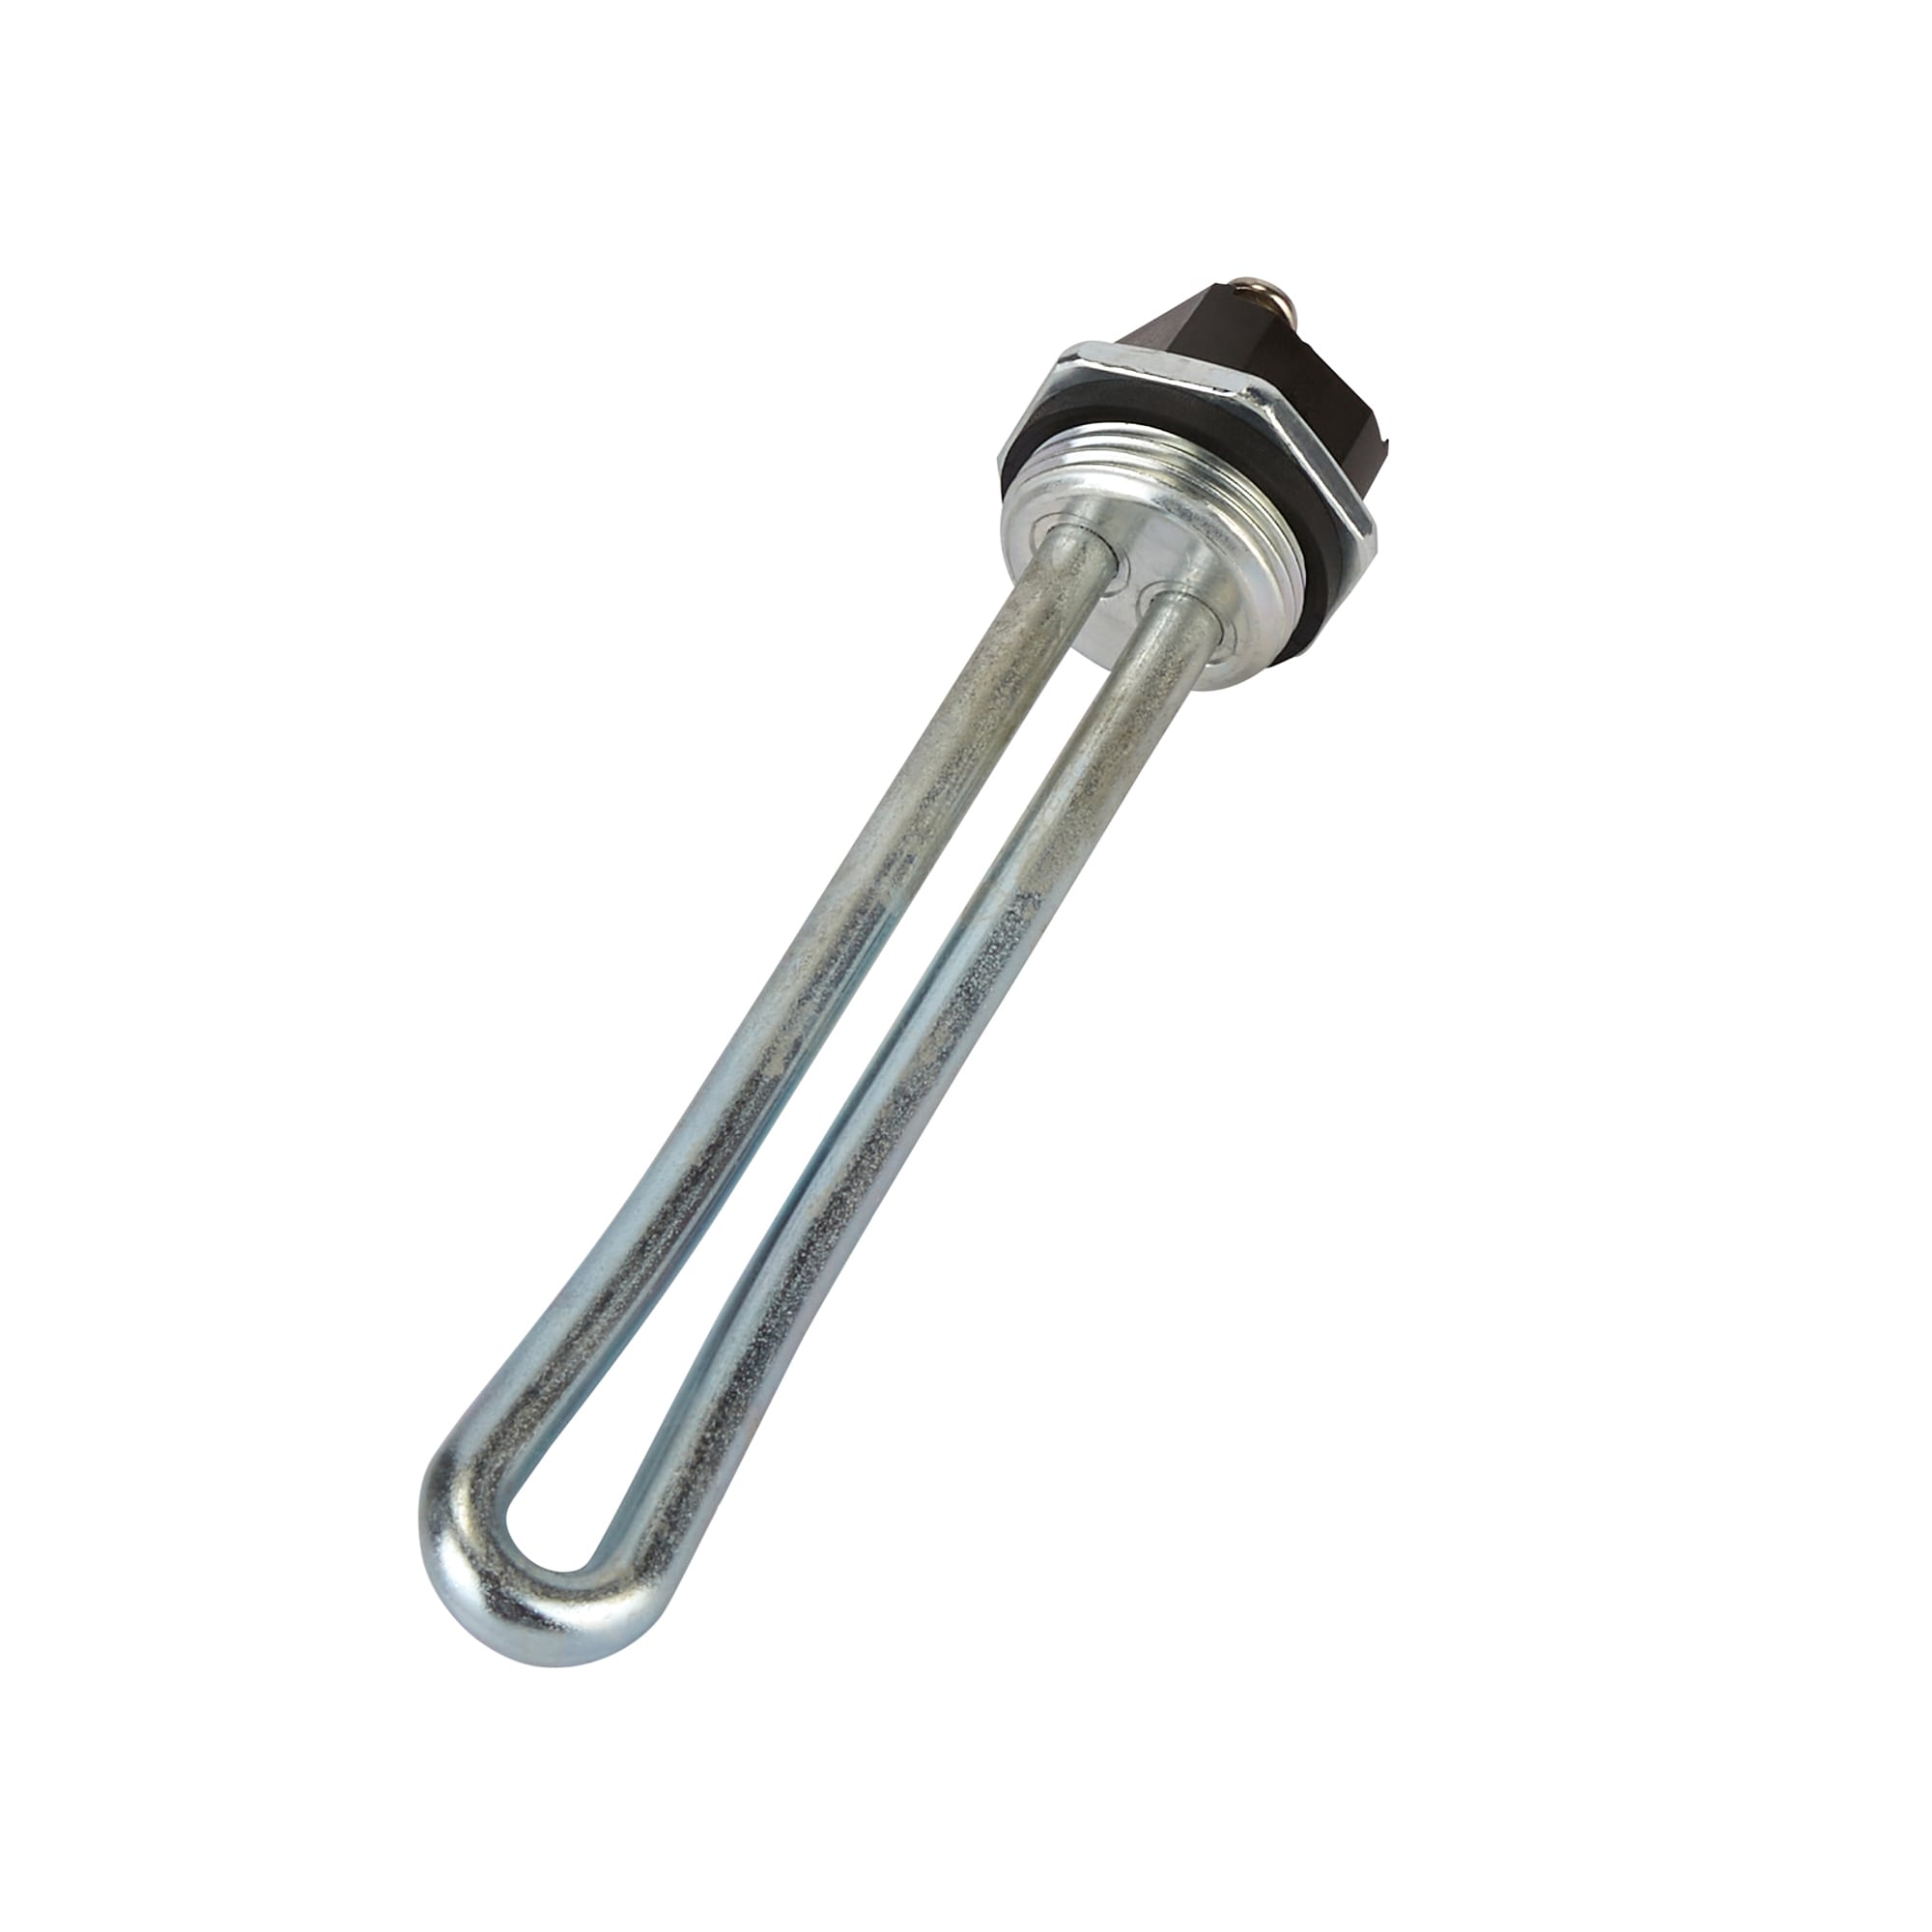 APPROVED VENDOR Water Heater Element: 6,000 W, 240V AC, Threaded Pipe,  22.63 in Insert Lg